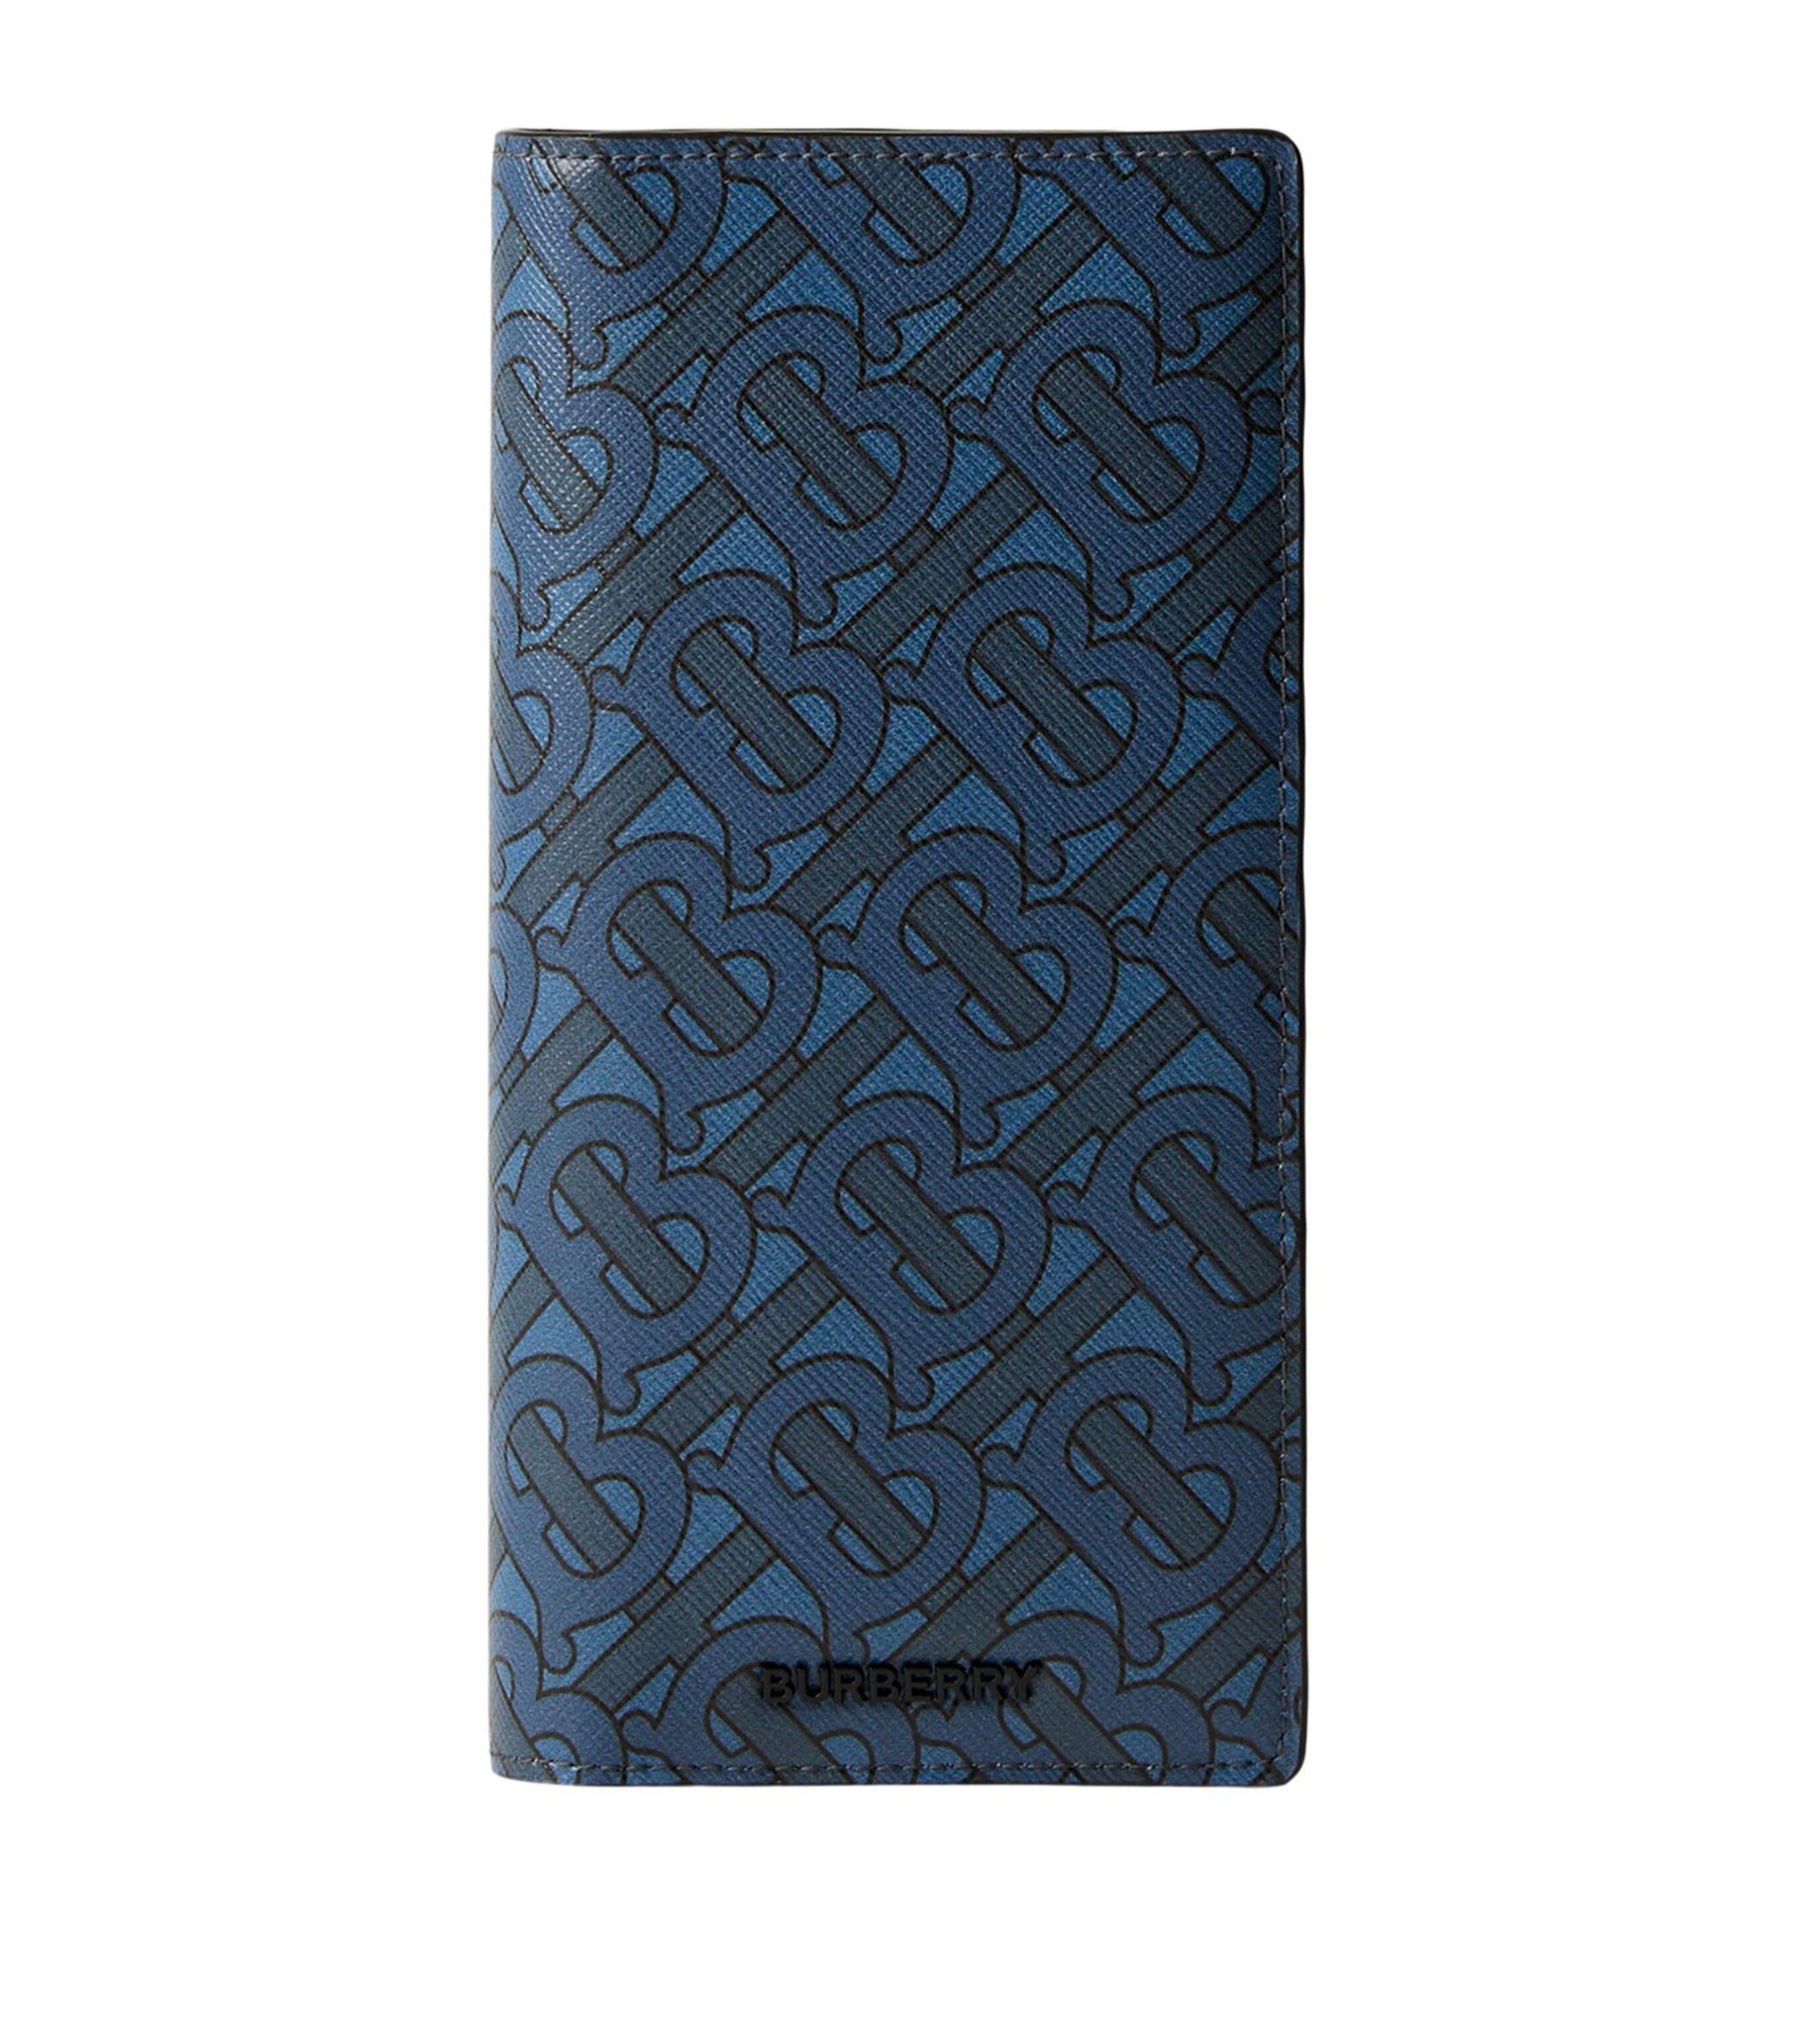 Burberry Monogram Print Continental Wallet in Blue for Men